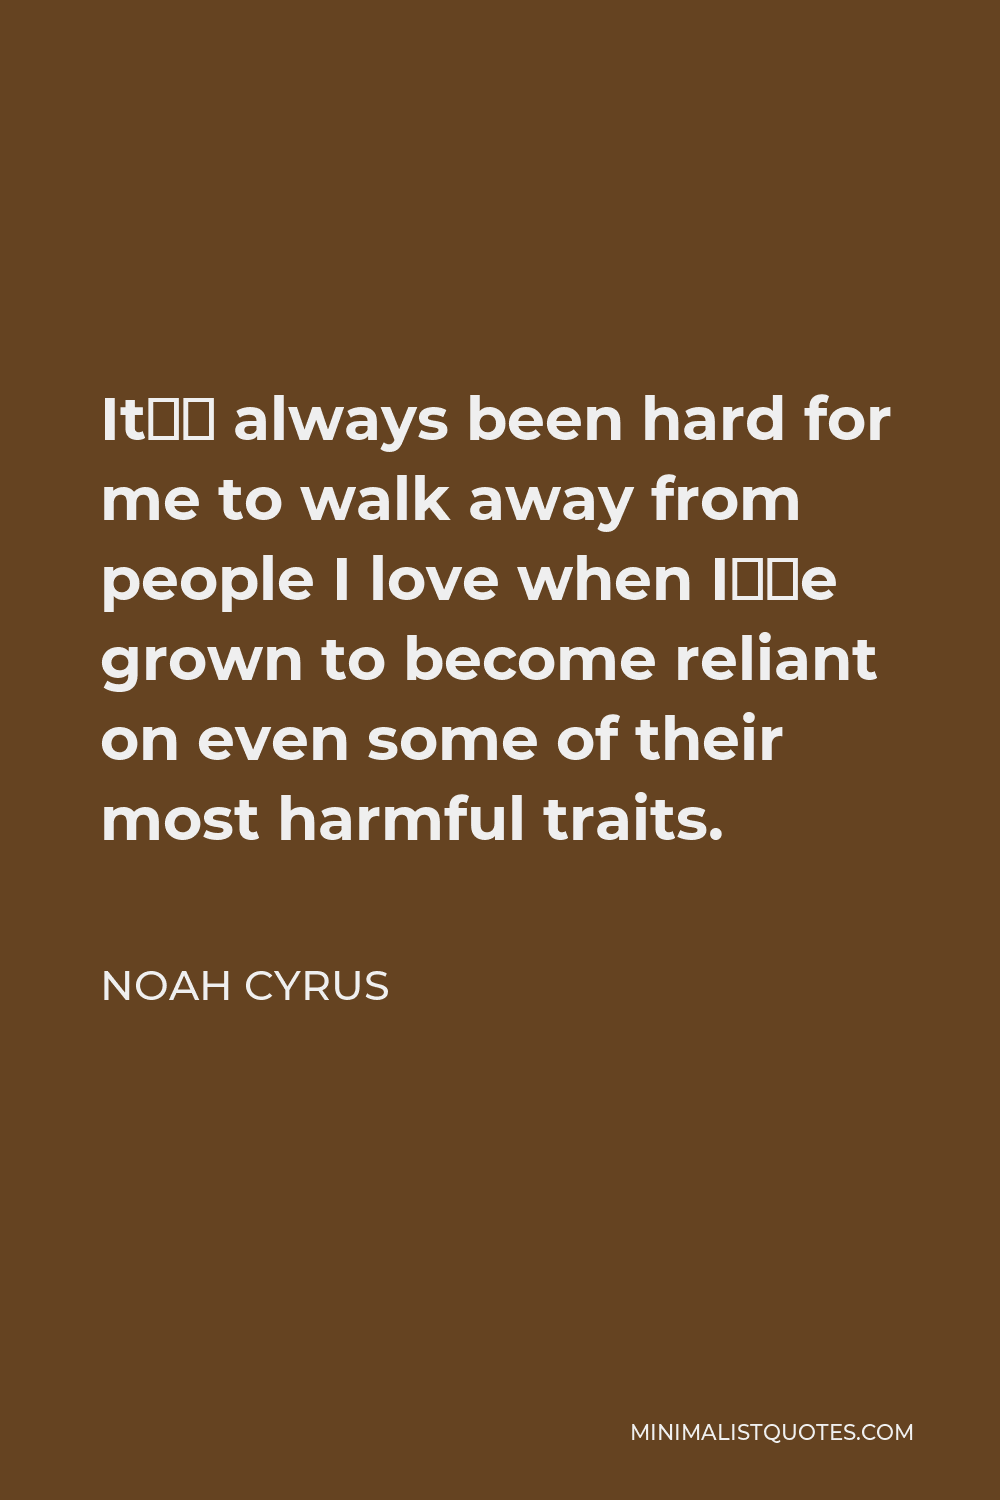 Noah Cyrus Quote - It’s always been hard for me to walk away from people I love when I’ve grown to become reliant on even some of their most harmful traits.